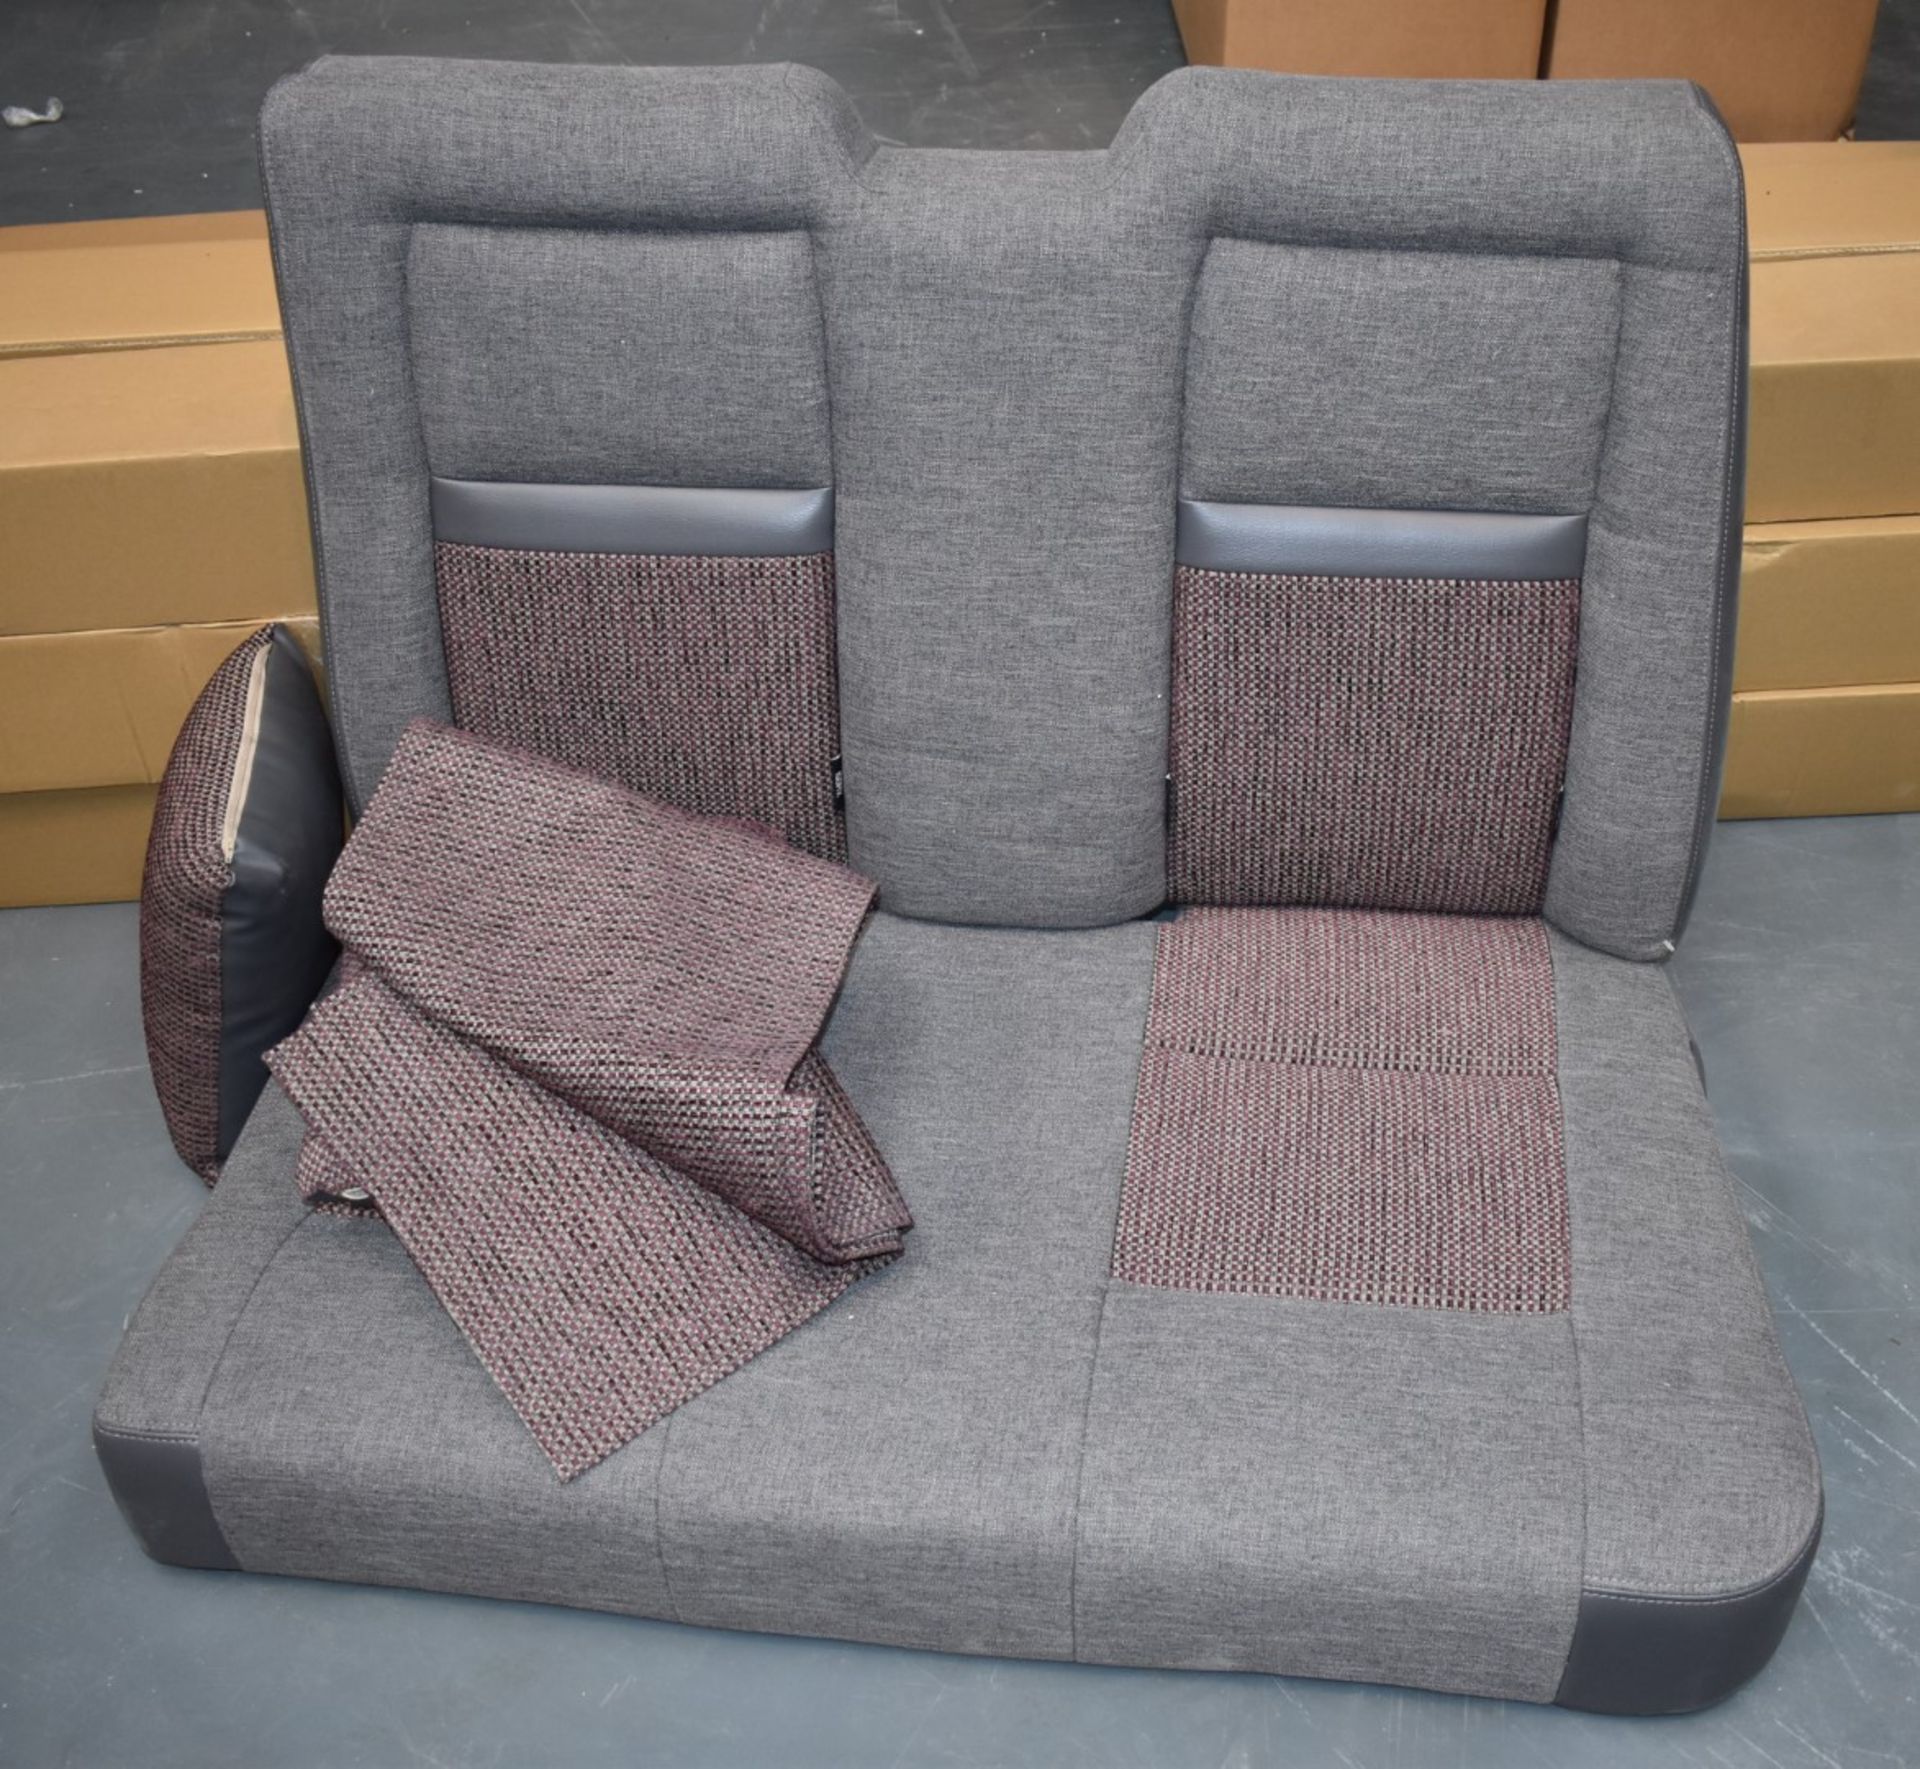 1 x Set of Rear Van Seats With Frame, Seatbelts, Headrests, Pillows, Spare Fabric and Fittings - - Image 13 of 13